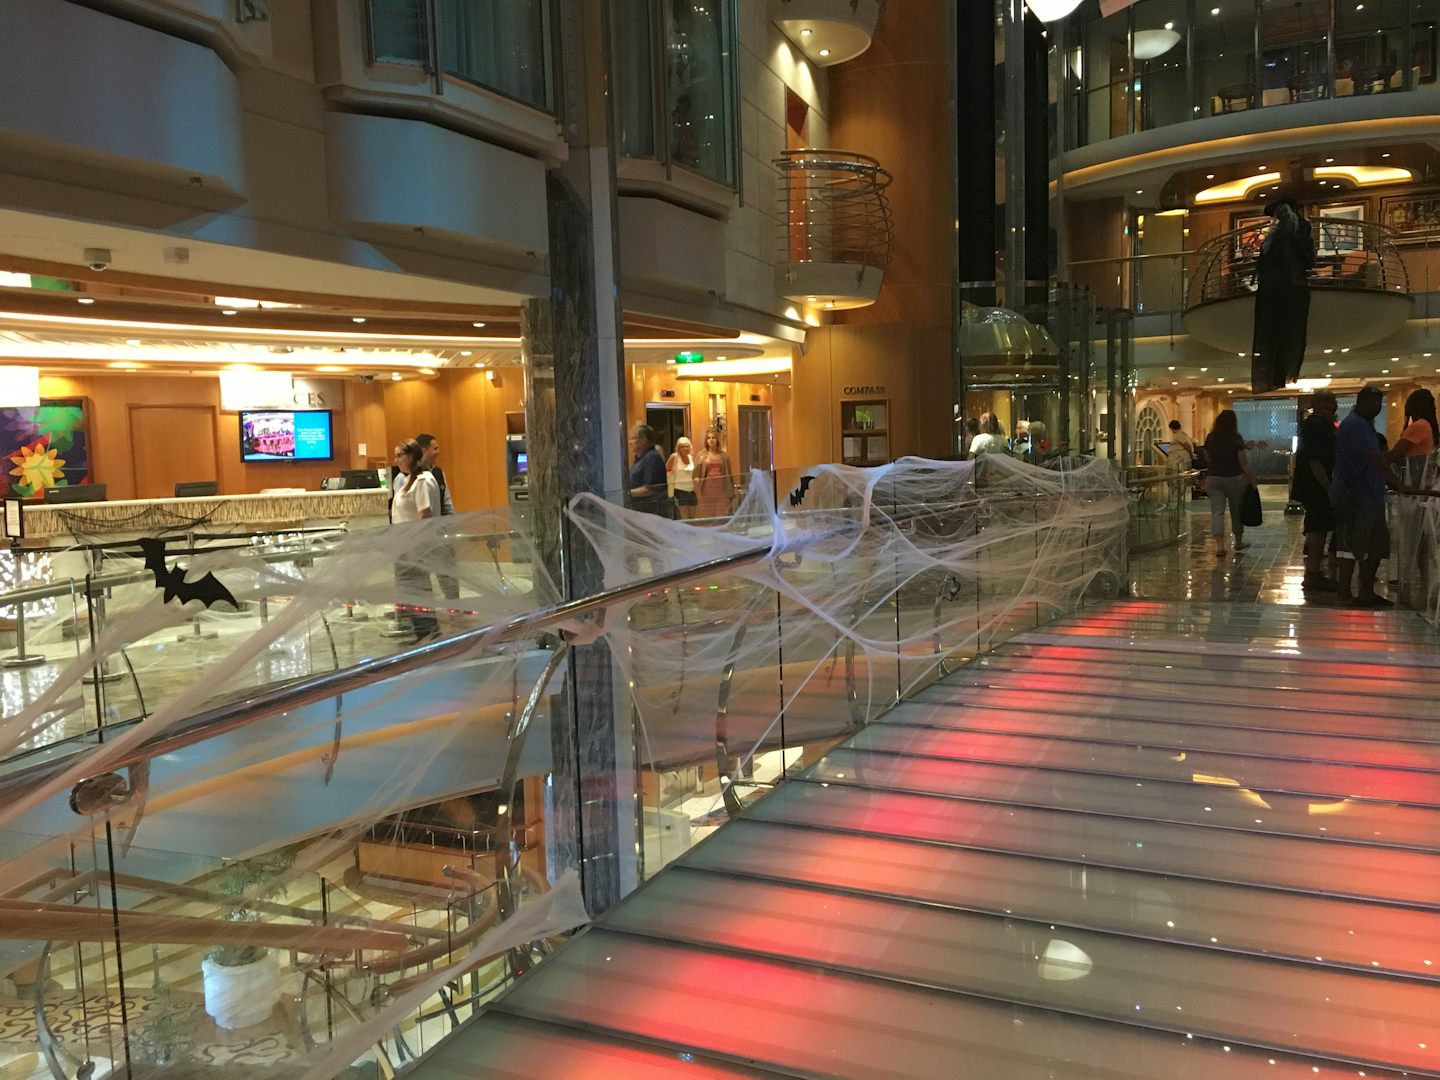 Halloween decorations aboard Liberty of the Seas